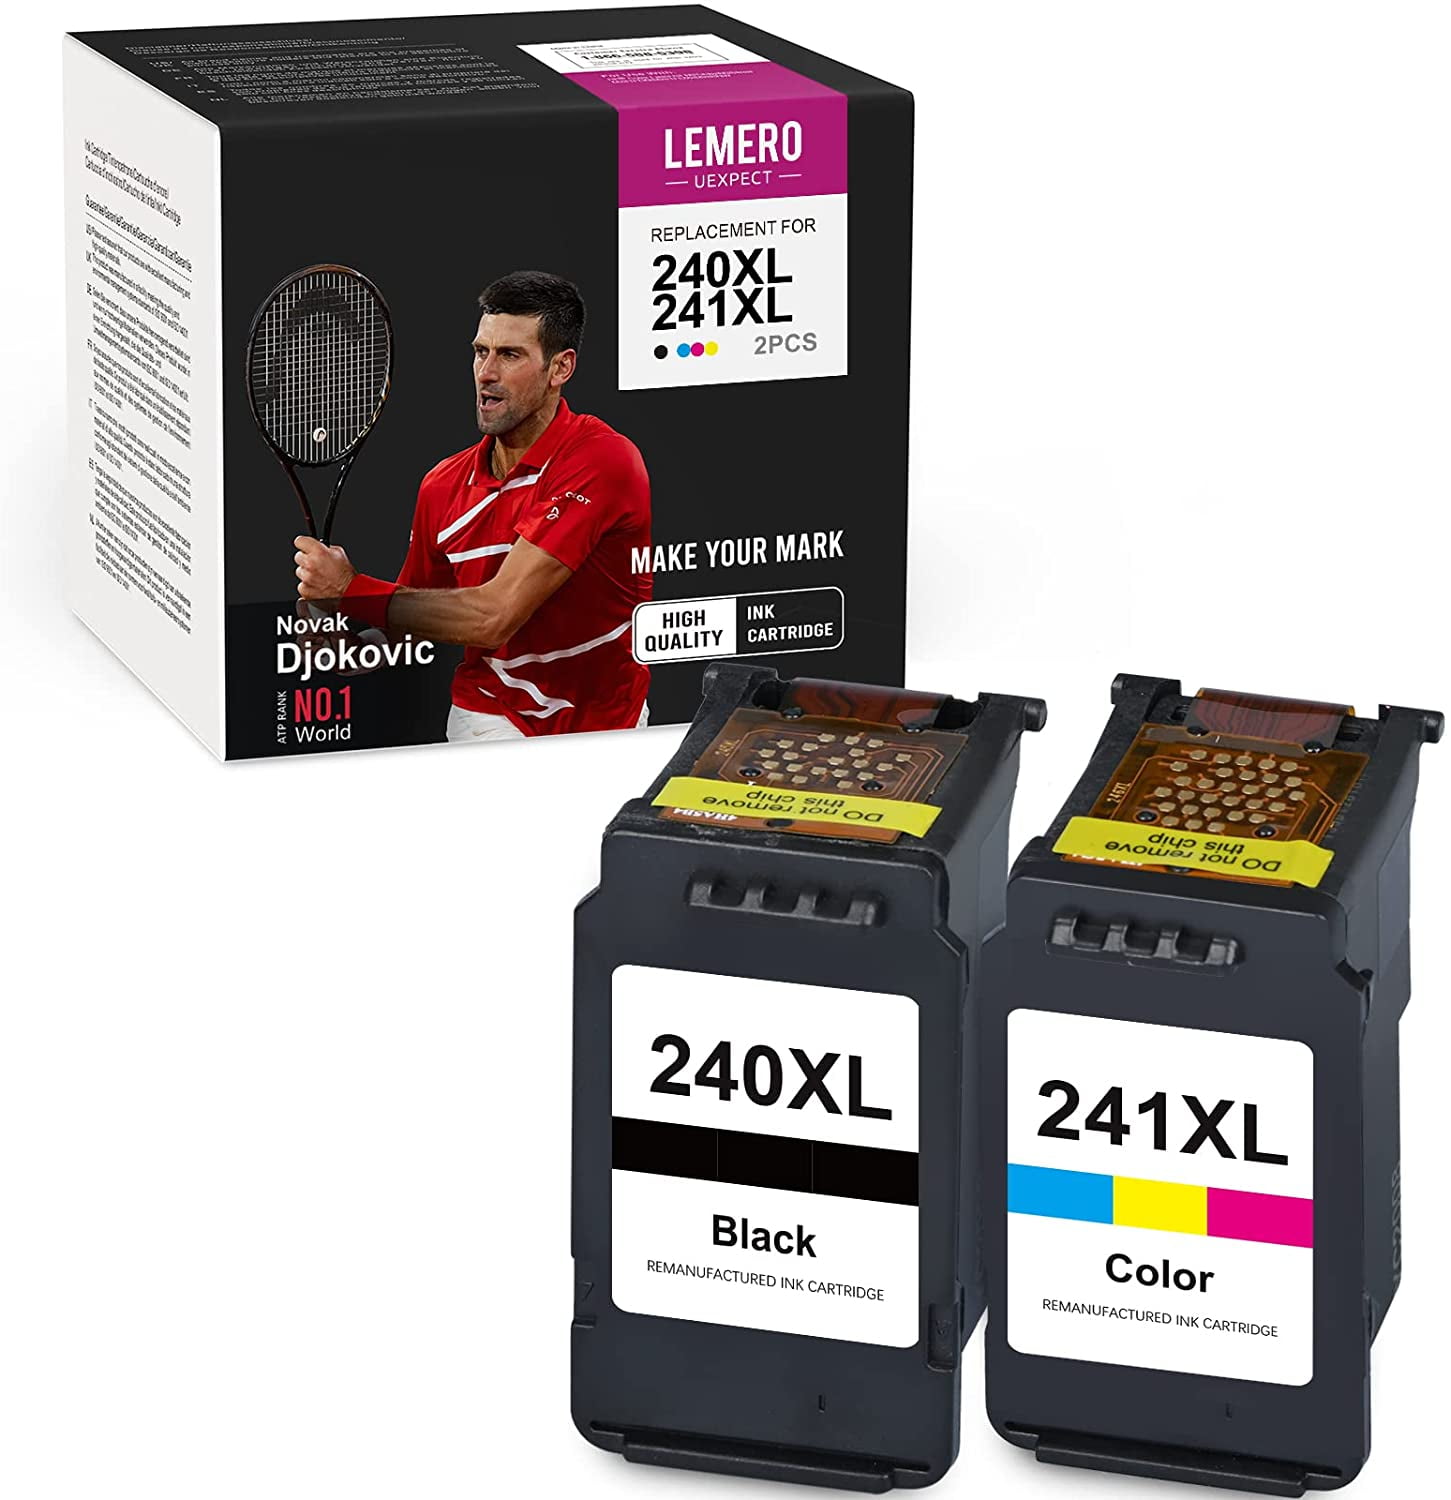 DoorStepInk Remanufactured in The USA Ink Cartridge Replacement for Canon PG-240XL 240 XL Black 2Pk for Canon Pixma MG3120 MG3520 MG4220 MX439 MX479 TS5120 